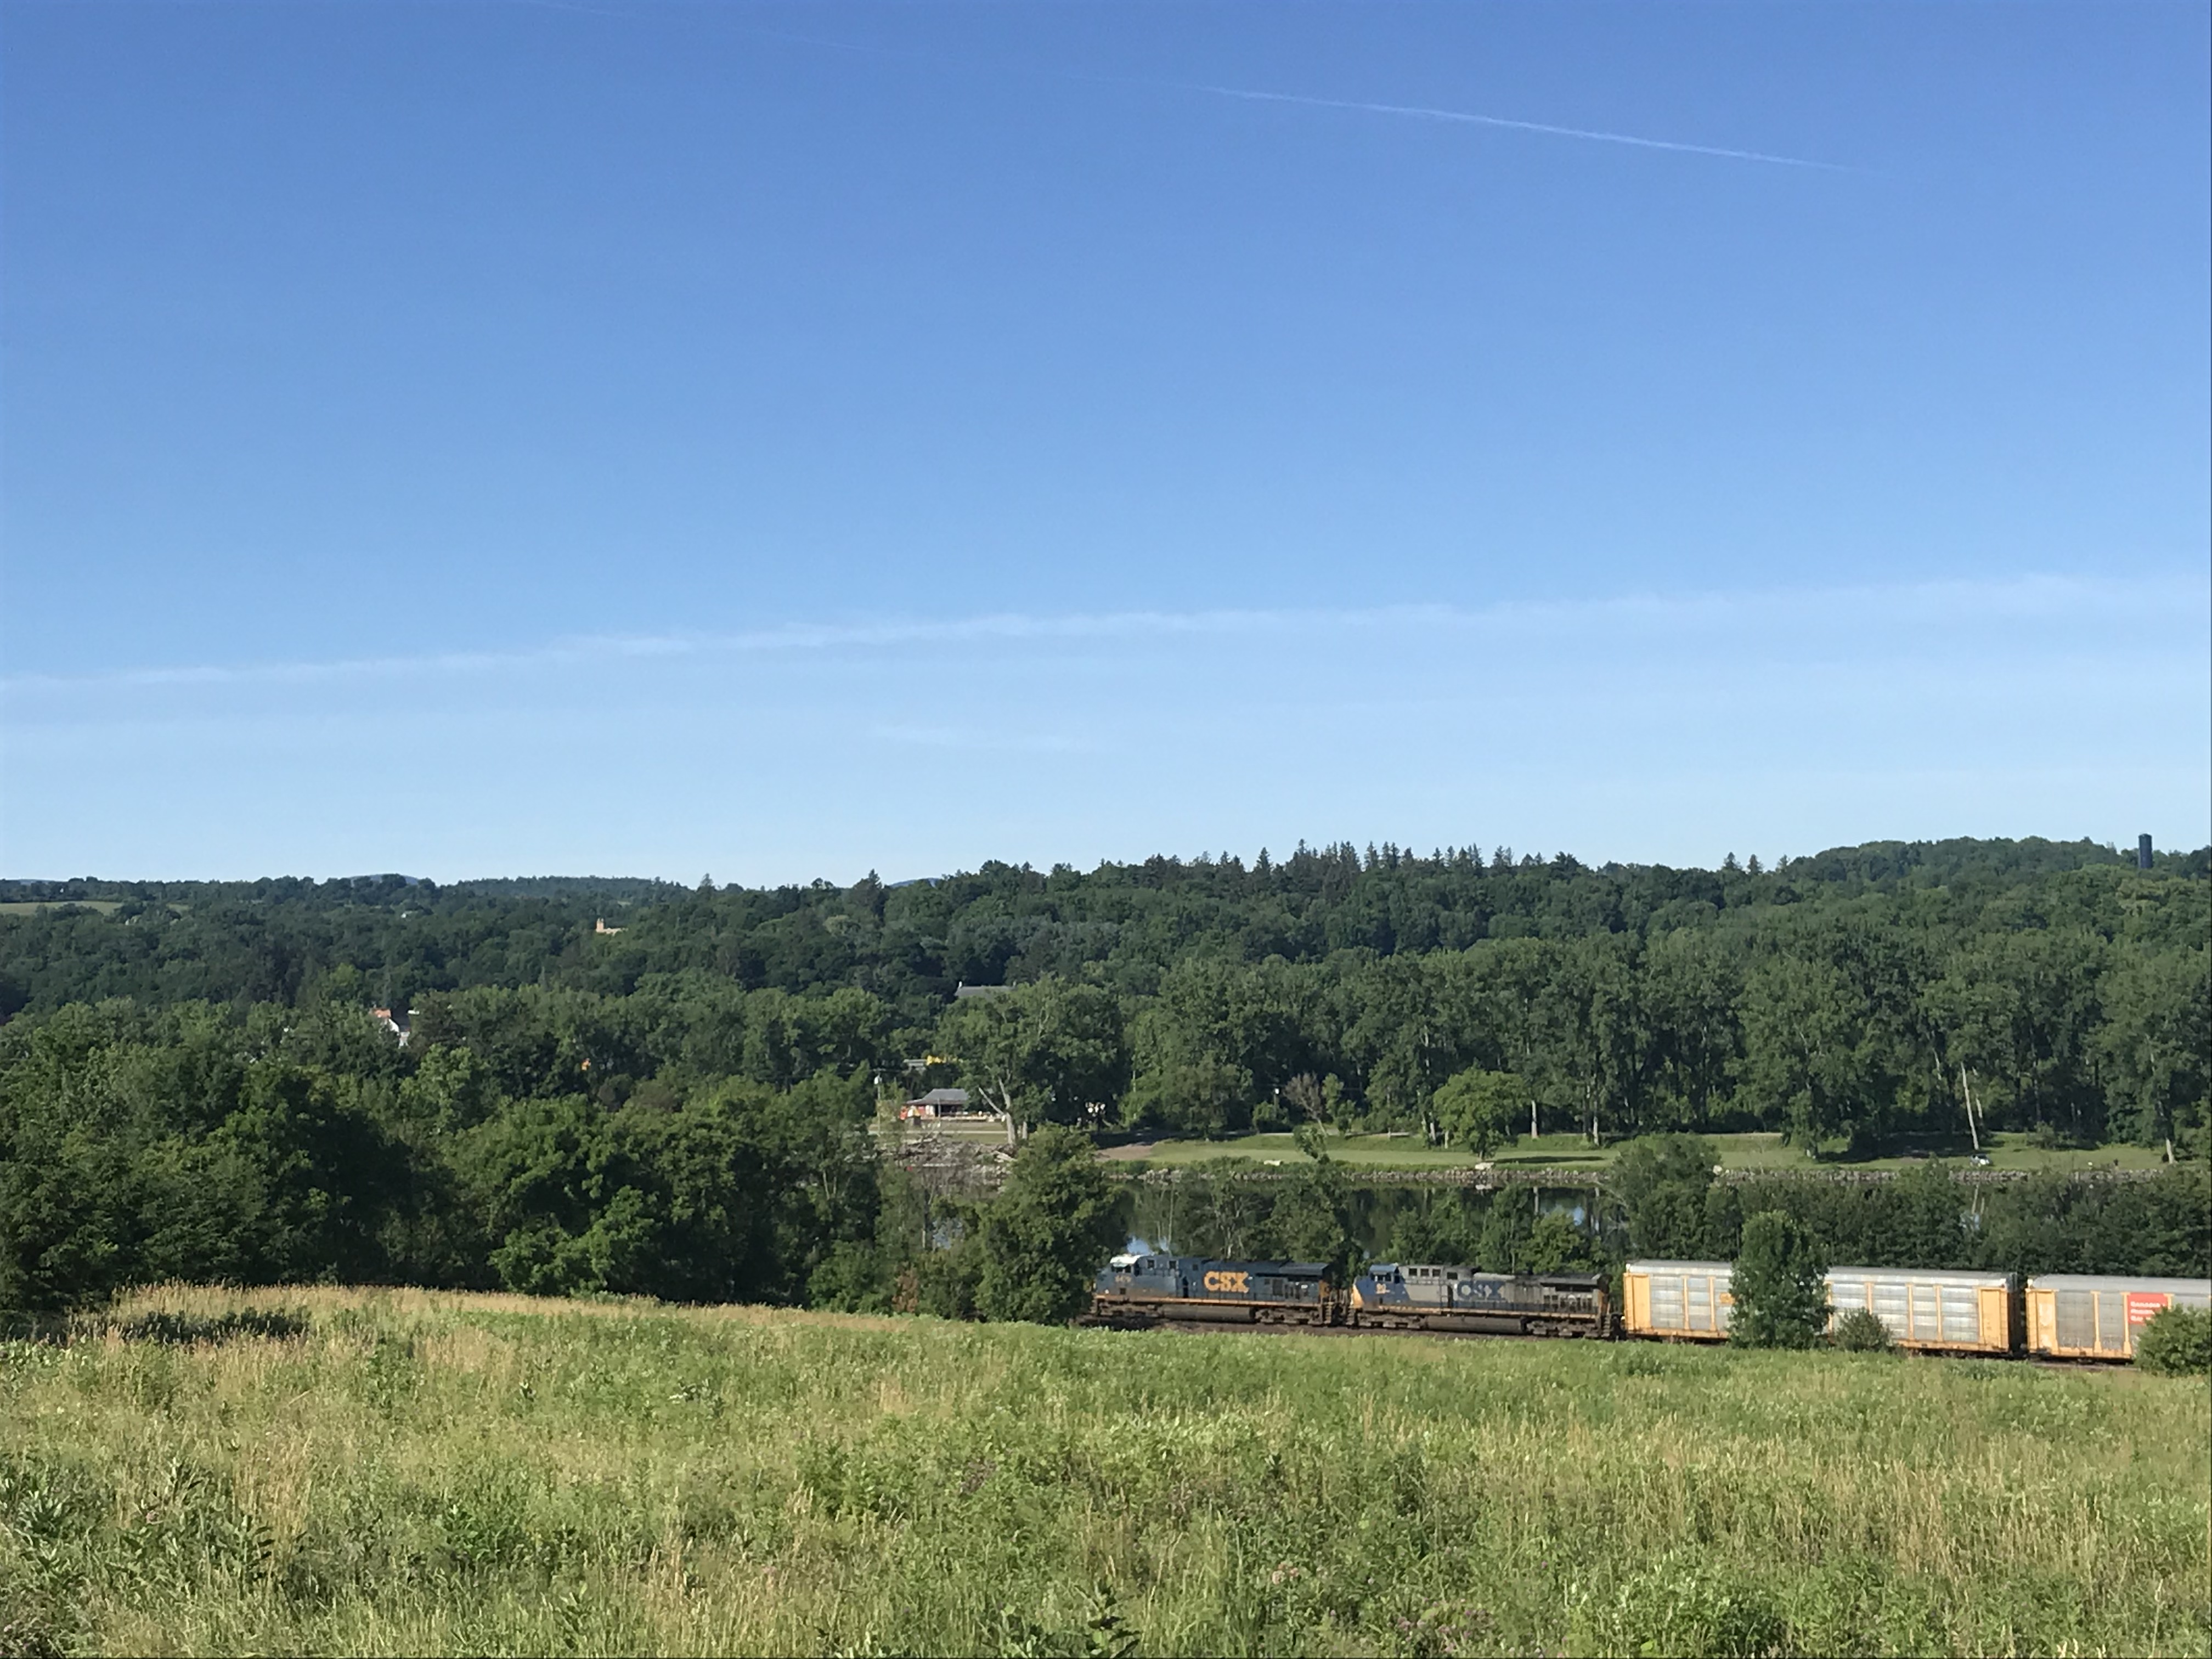 Day 45 – Mohawk Valley